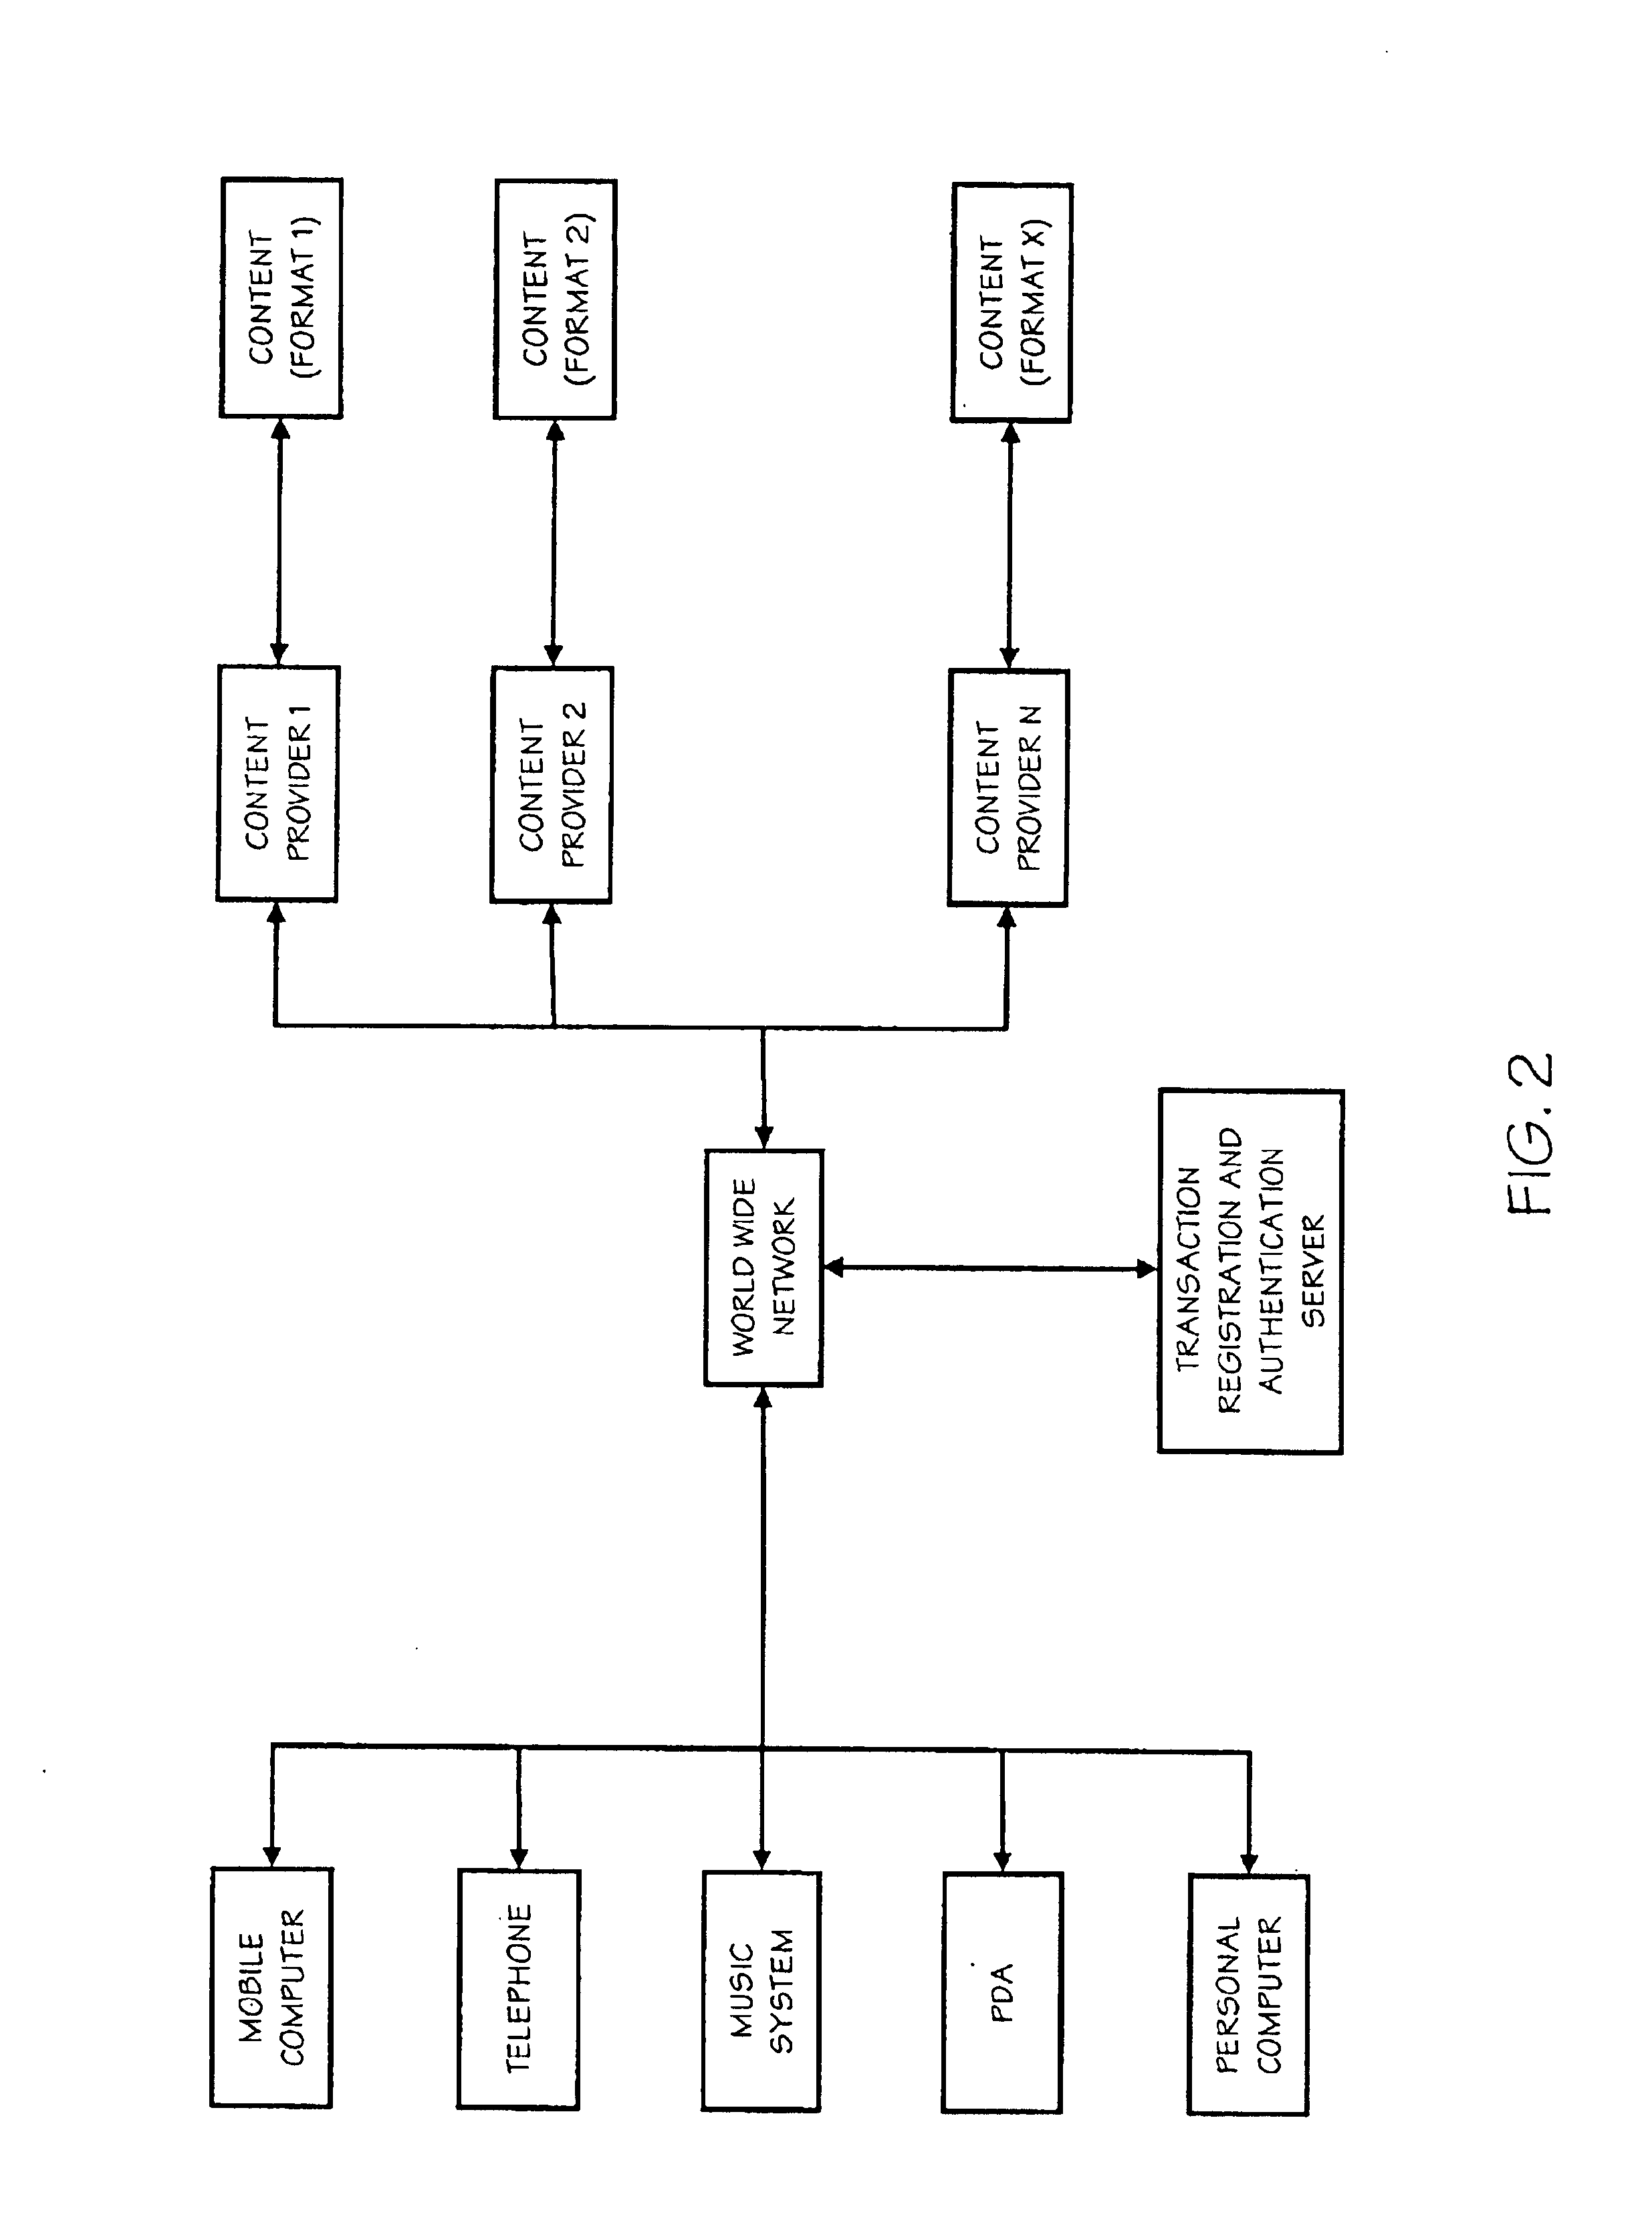 System and method of providing a virtual appliance